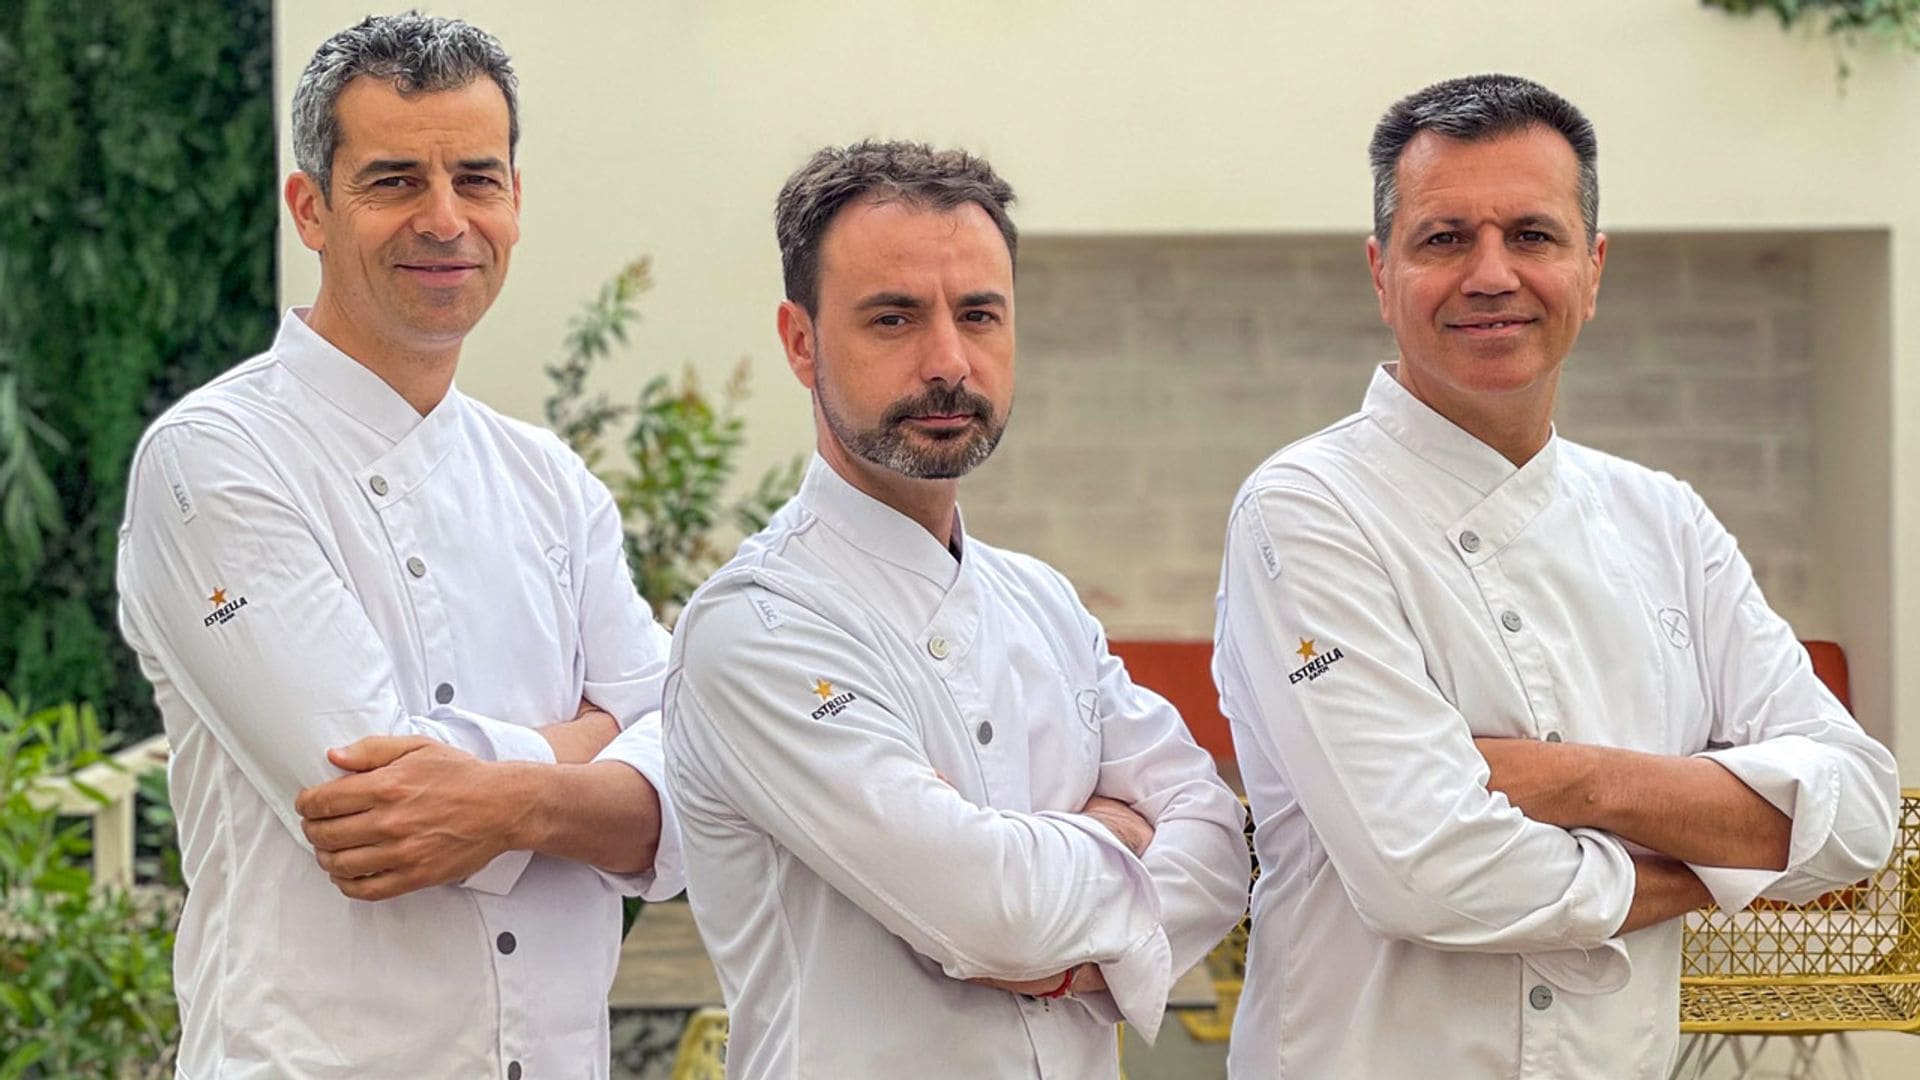 chefs disfrutar face